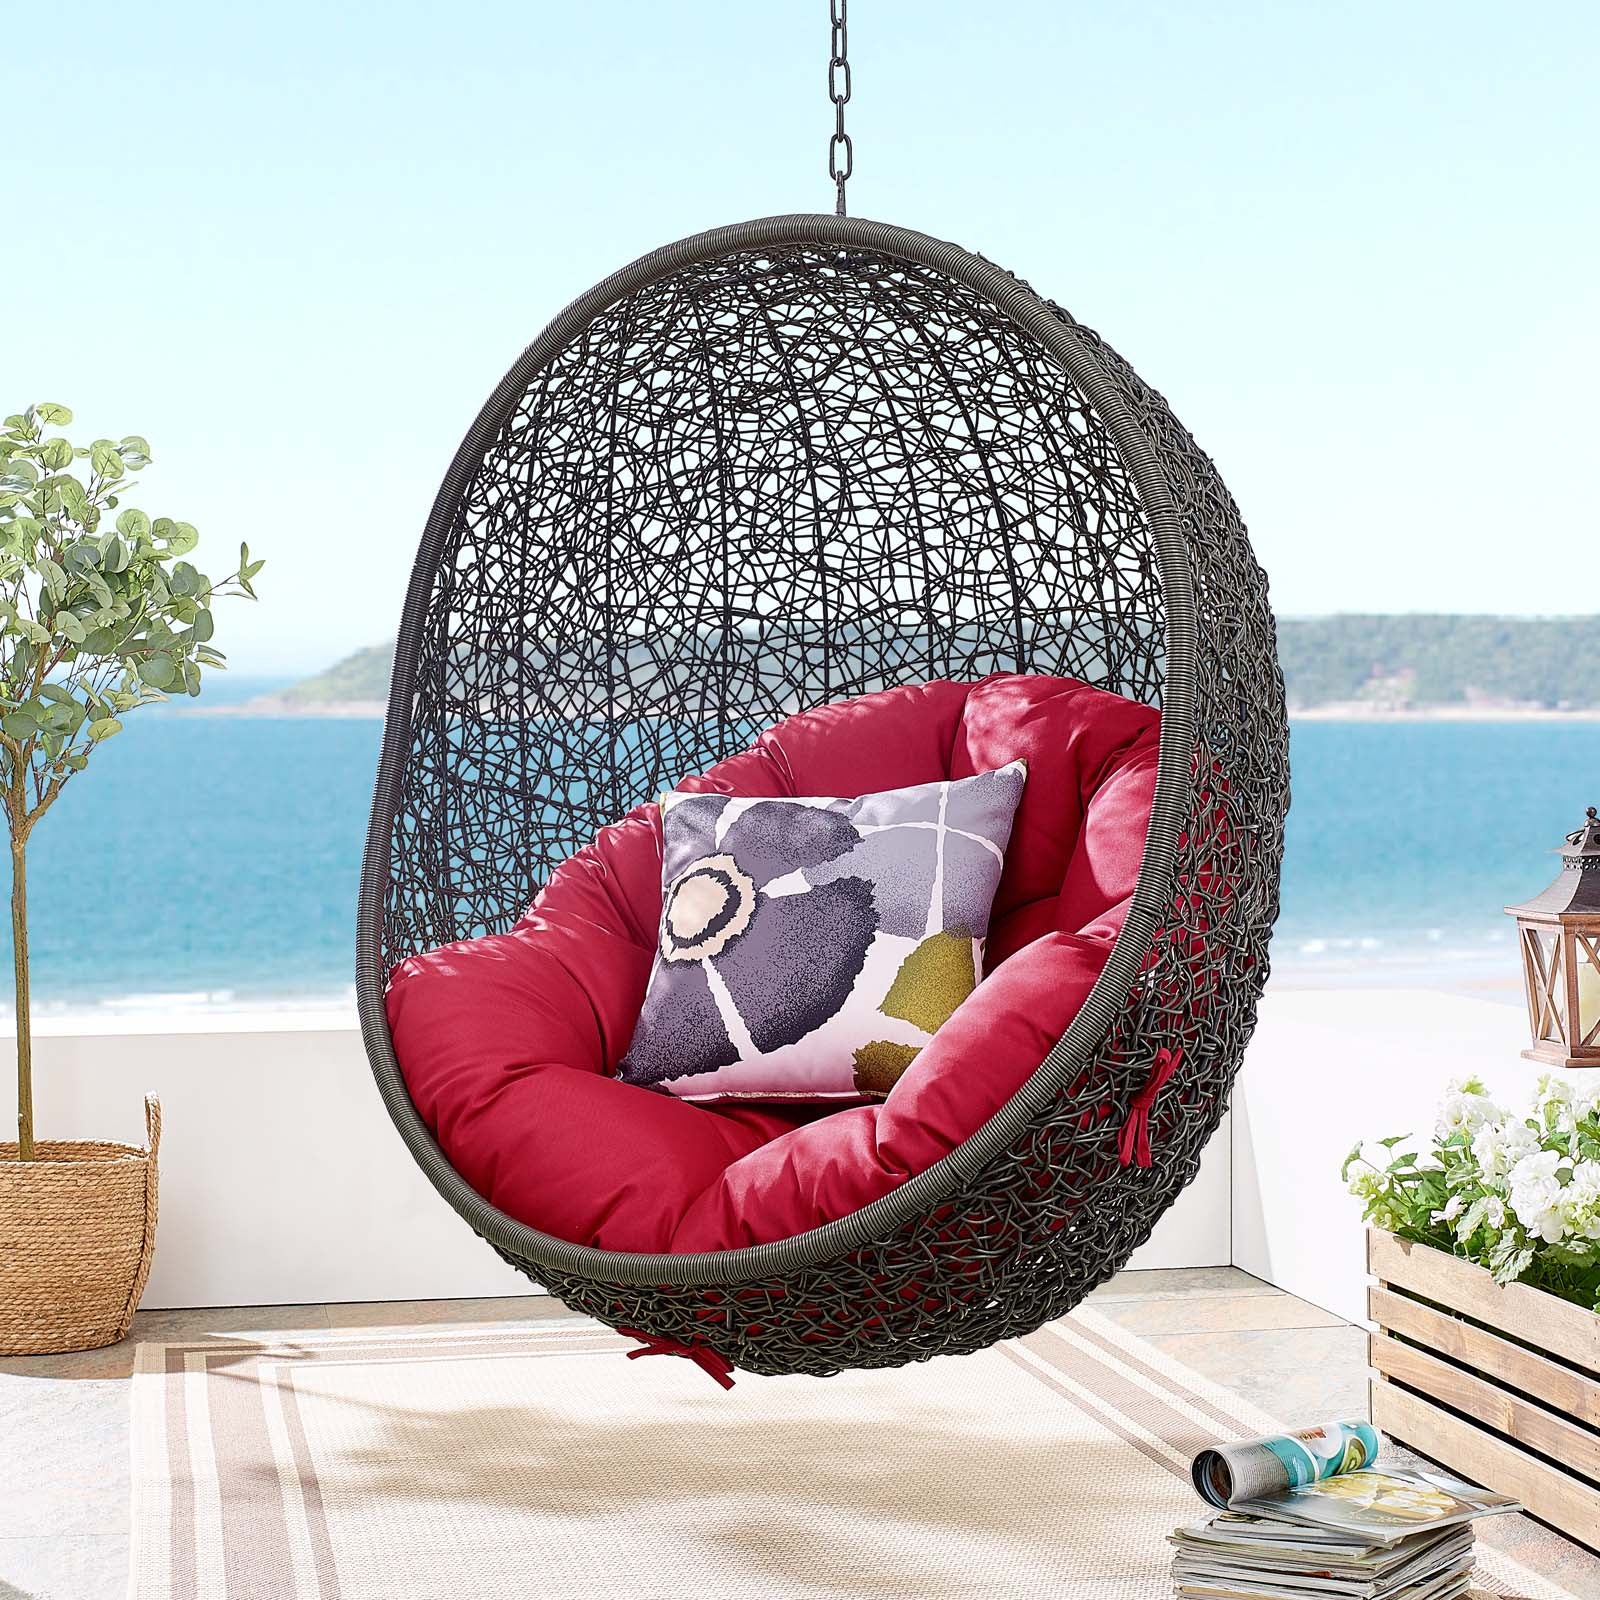 Hide Outdoor Patio Swing Chair With Stand - East Shore Modern Home Furnishings